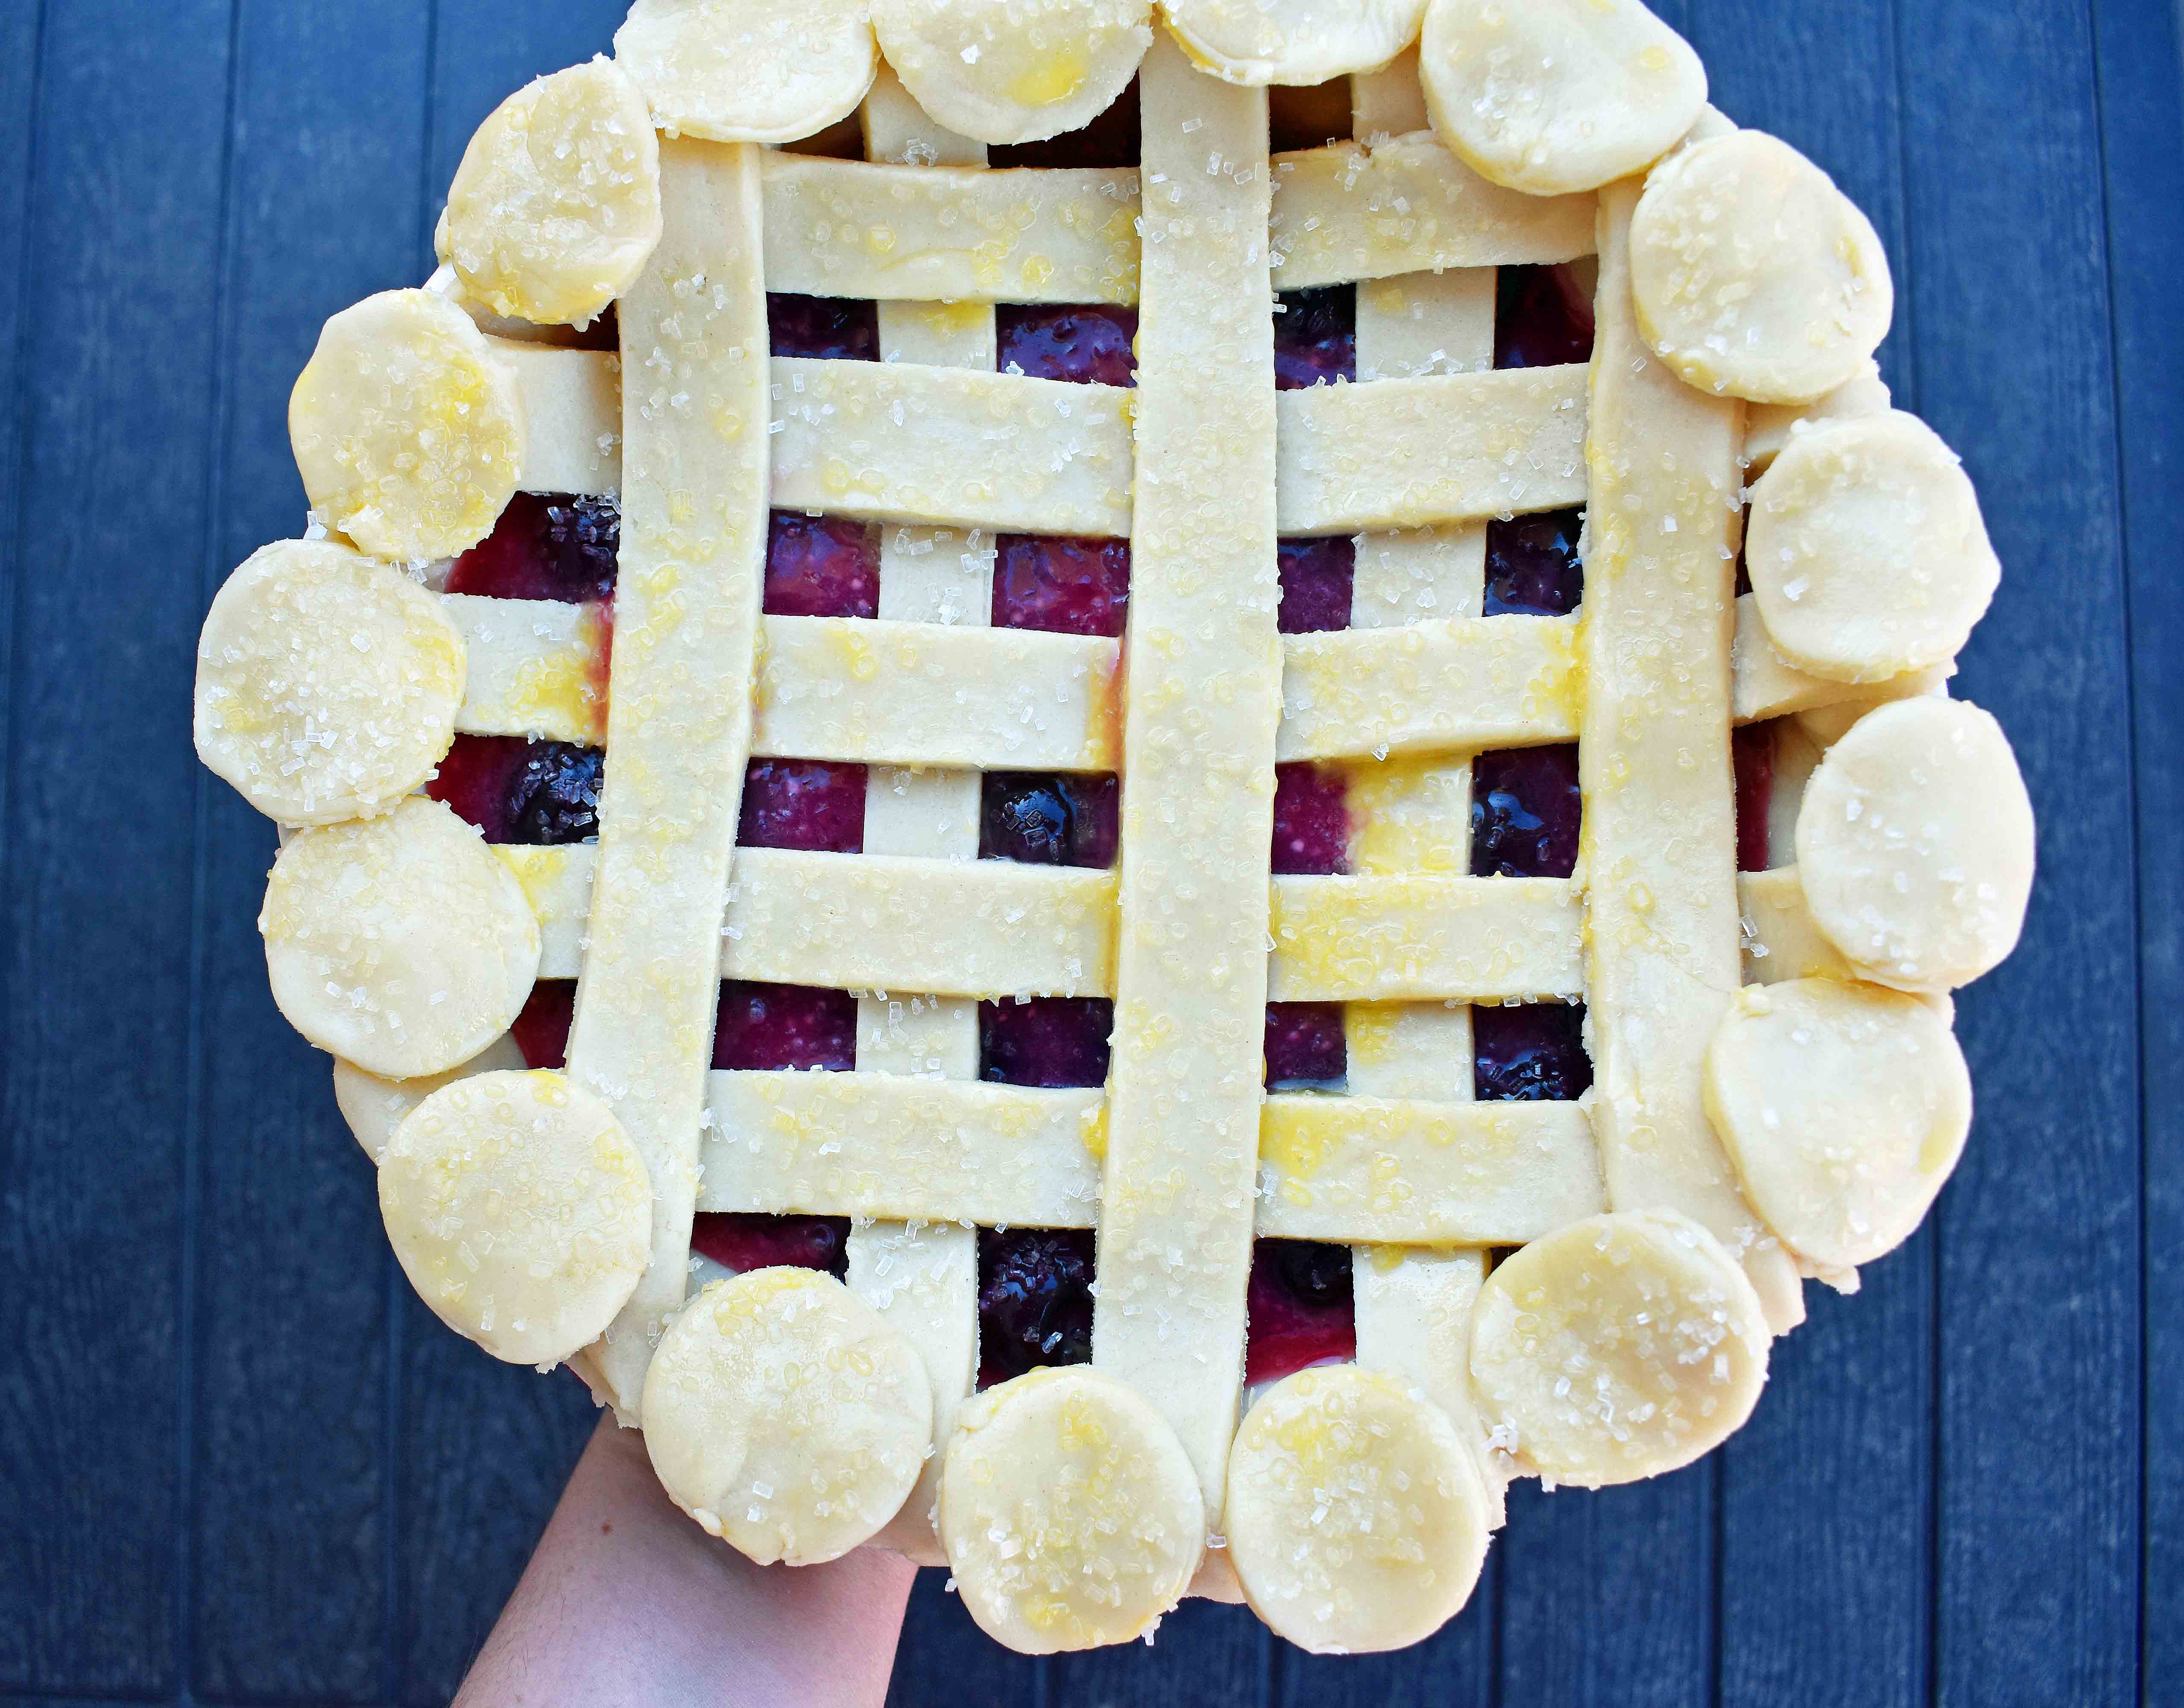 Sweet Cherry Pie by Modern Honey. Sweet Cherries in a simple glaze on top of a flaky, buttery pie crust.